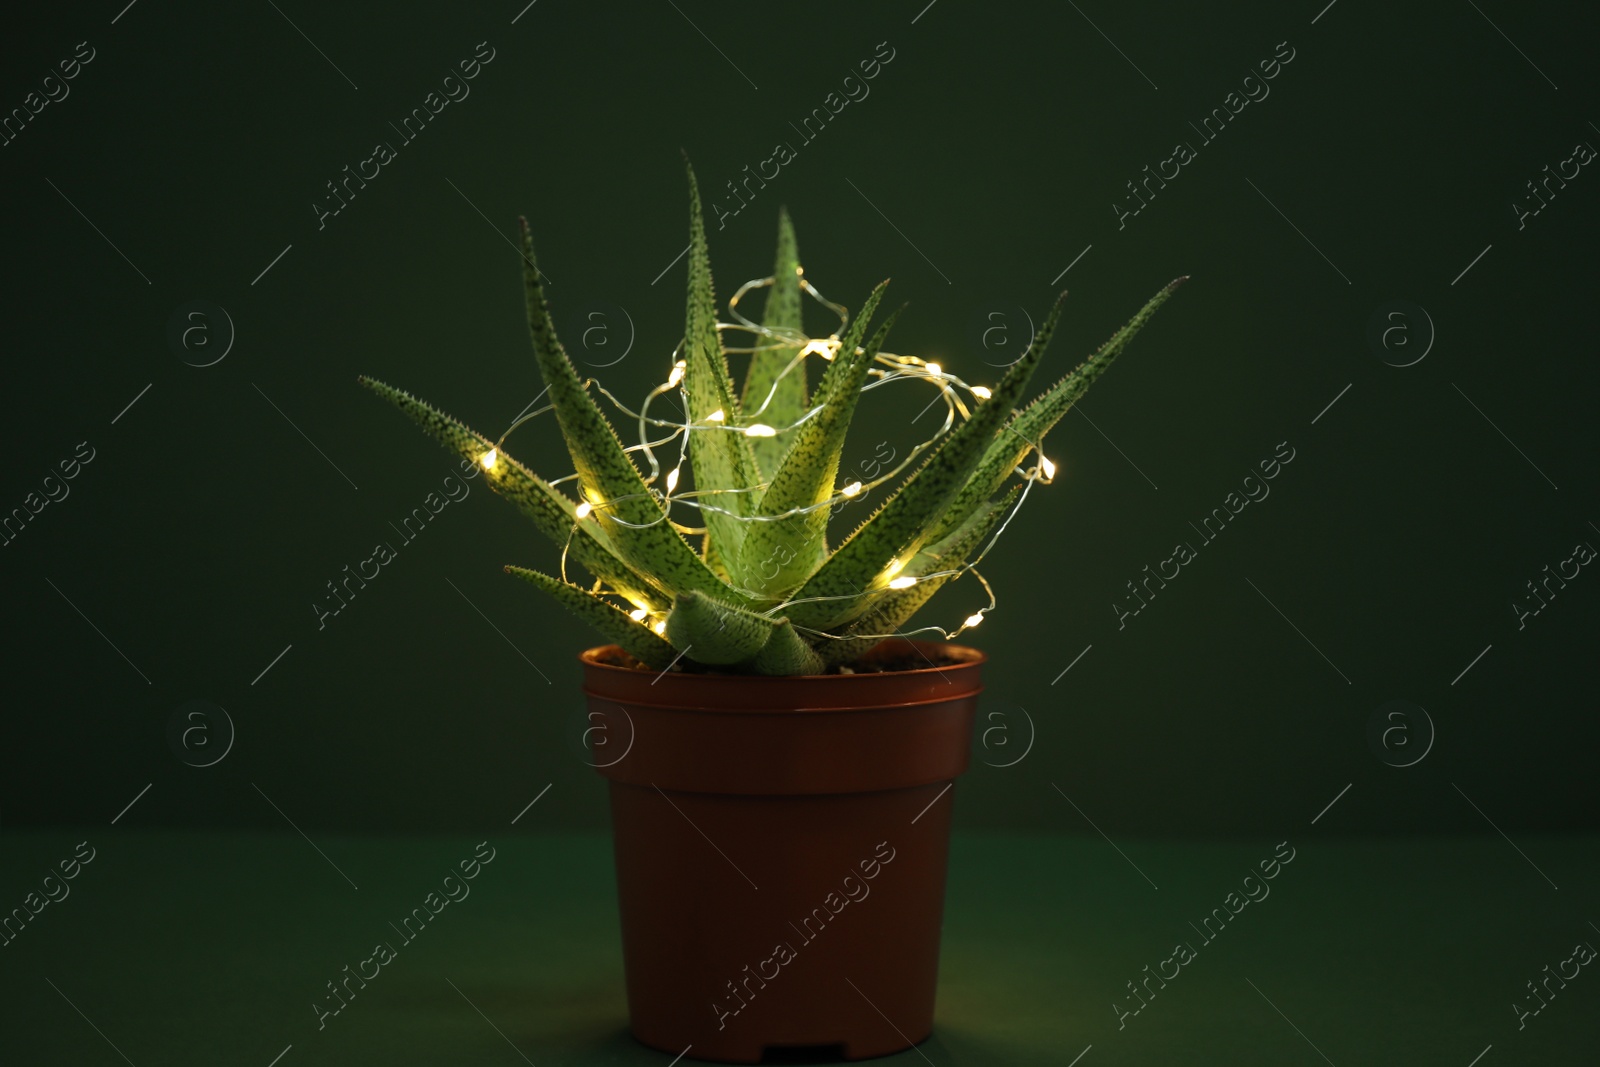 Photo of Cactus decorated with glowing fairy lights on green background